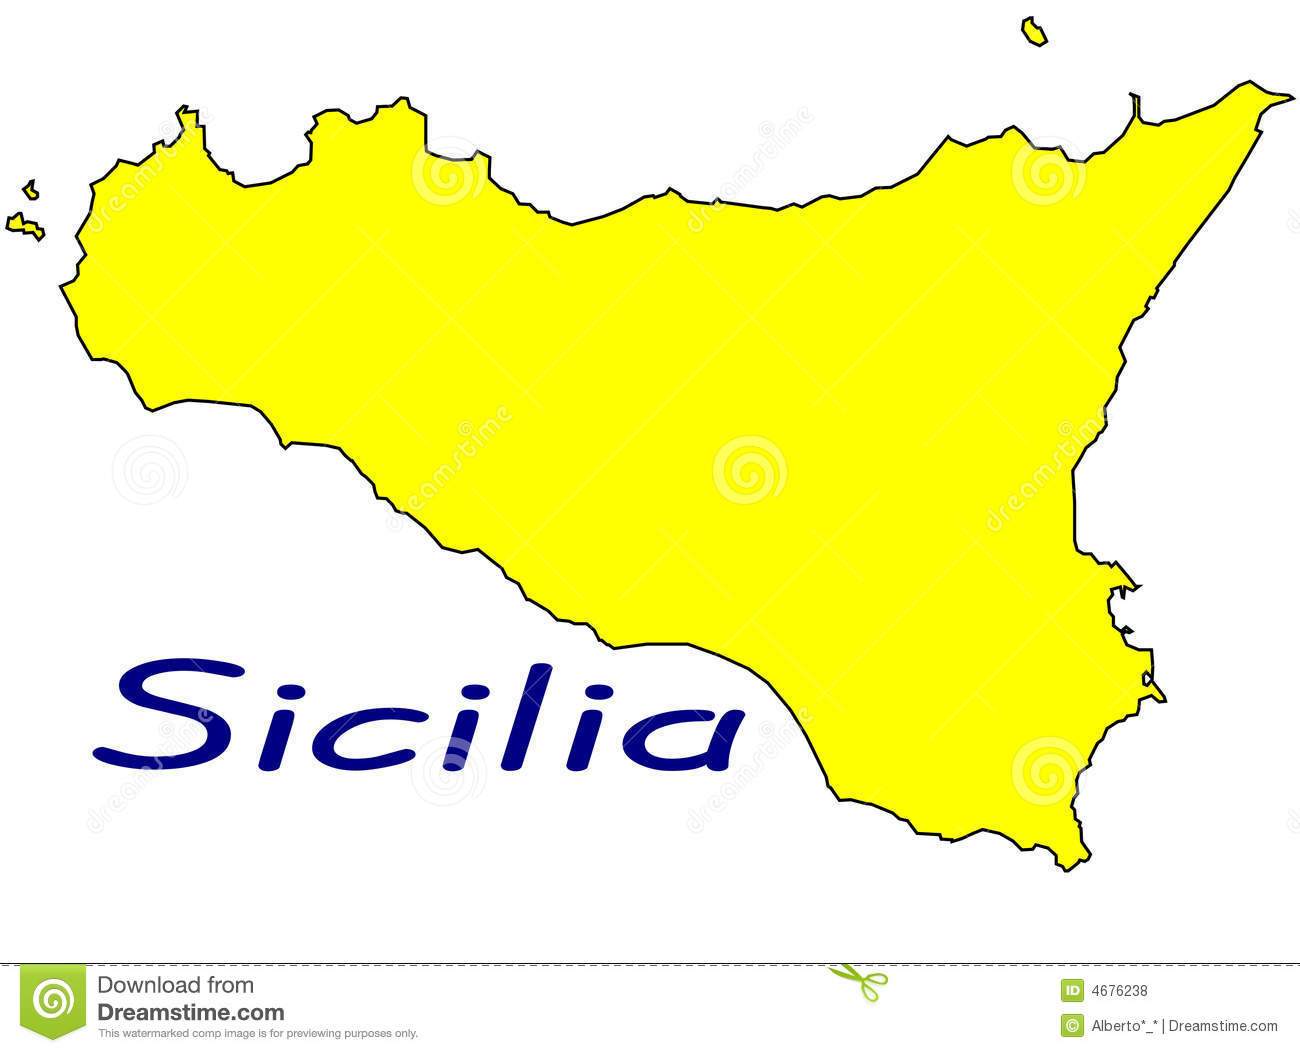 Sicily clipart #20, Download drawings